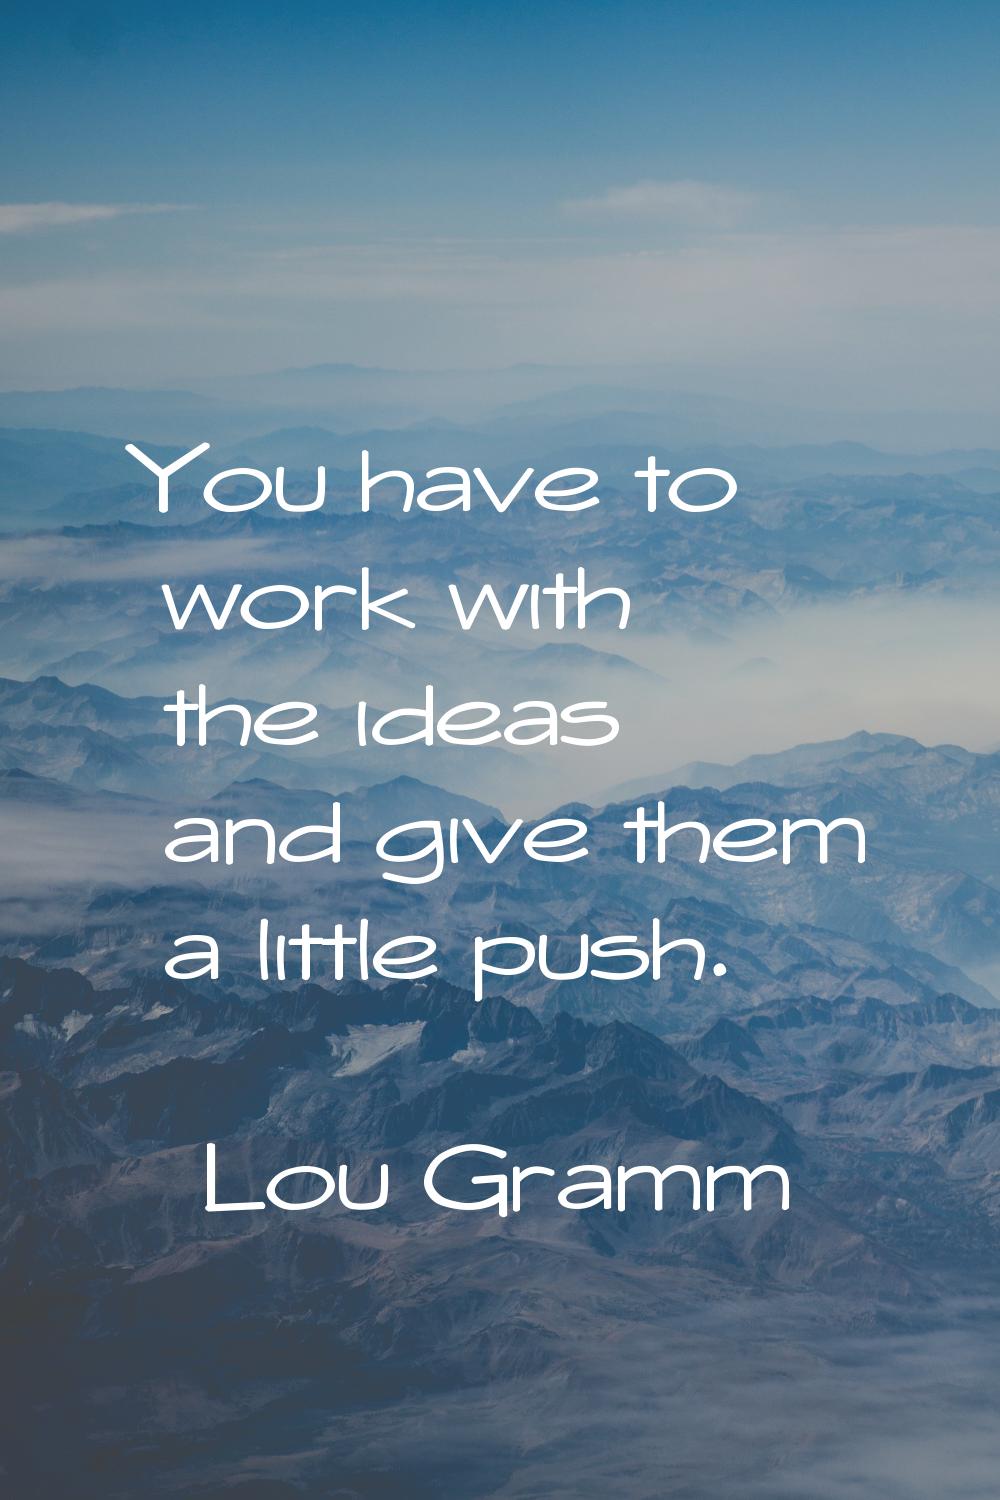 You have to work with the ideas and give them a little push.